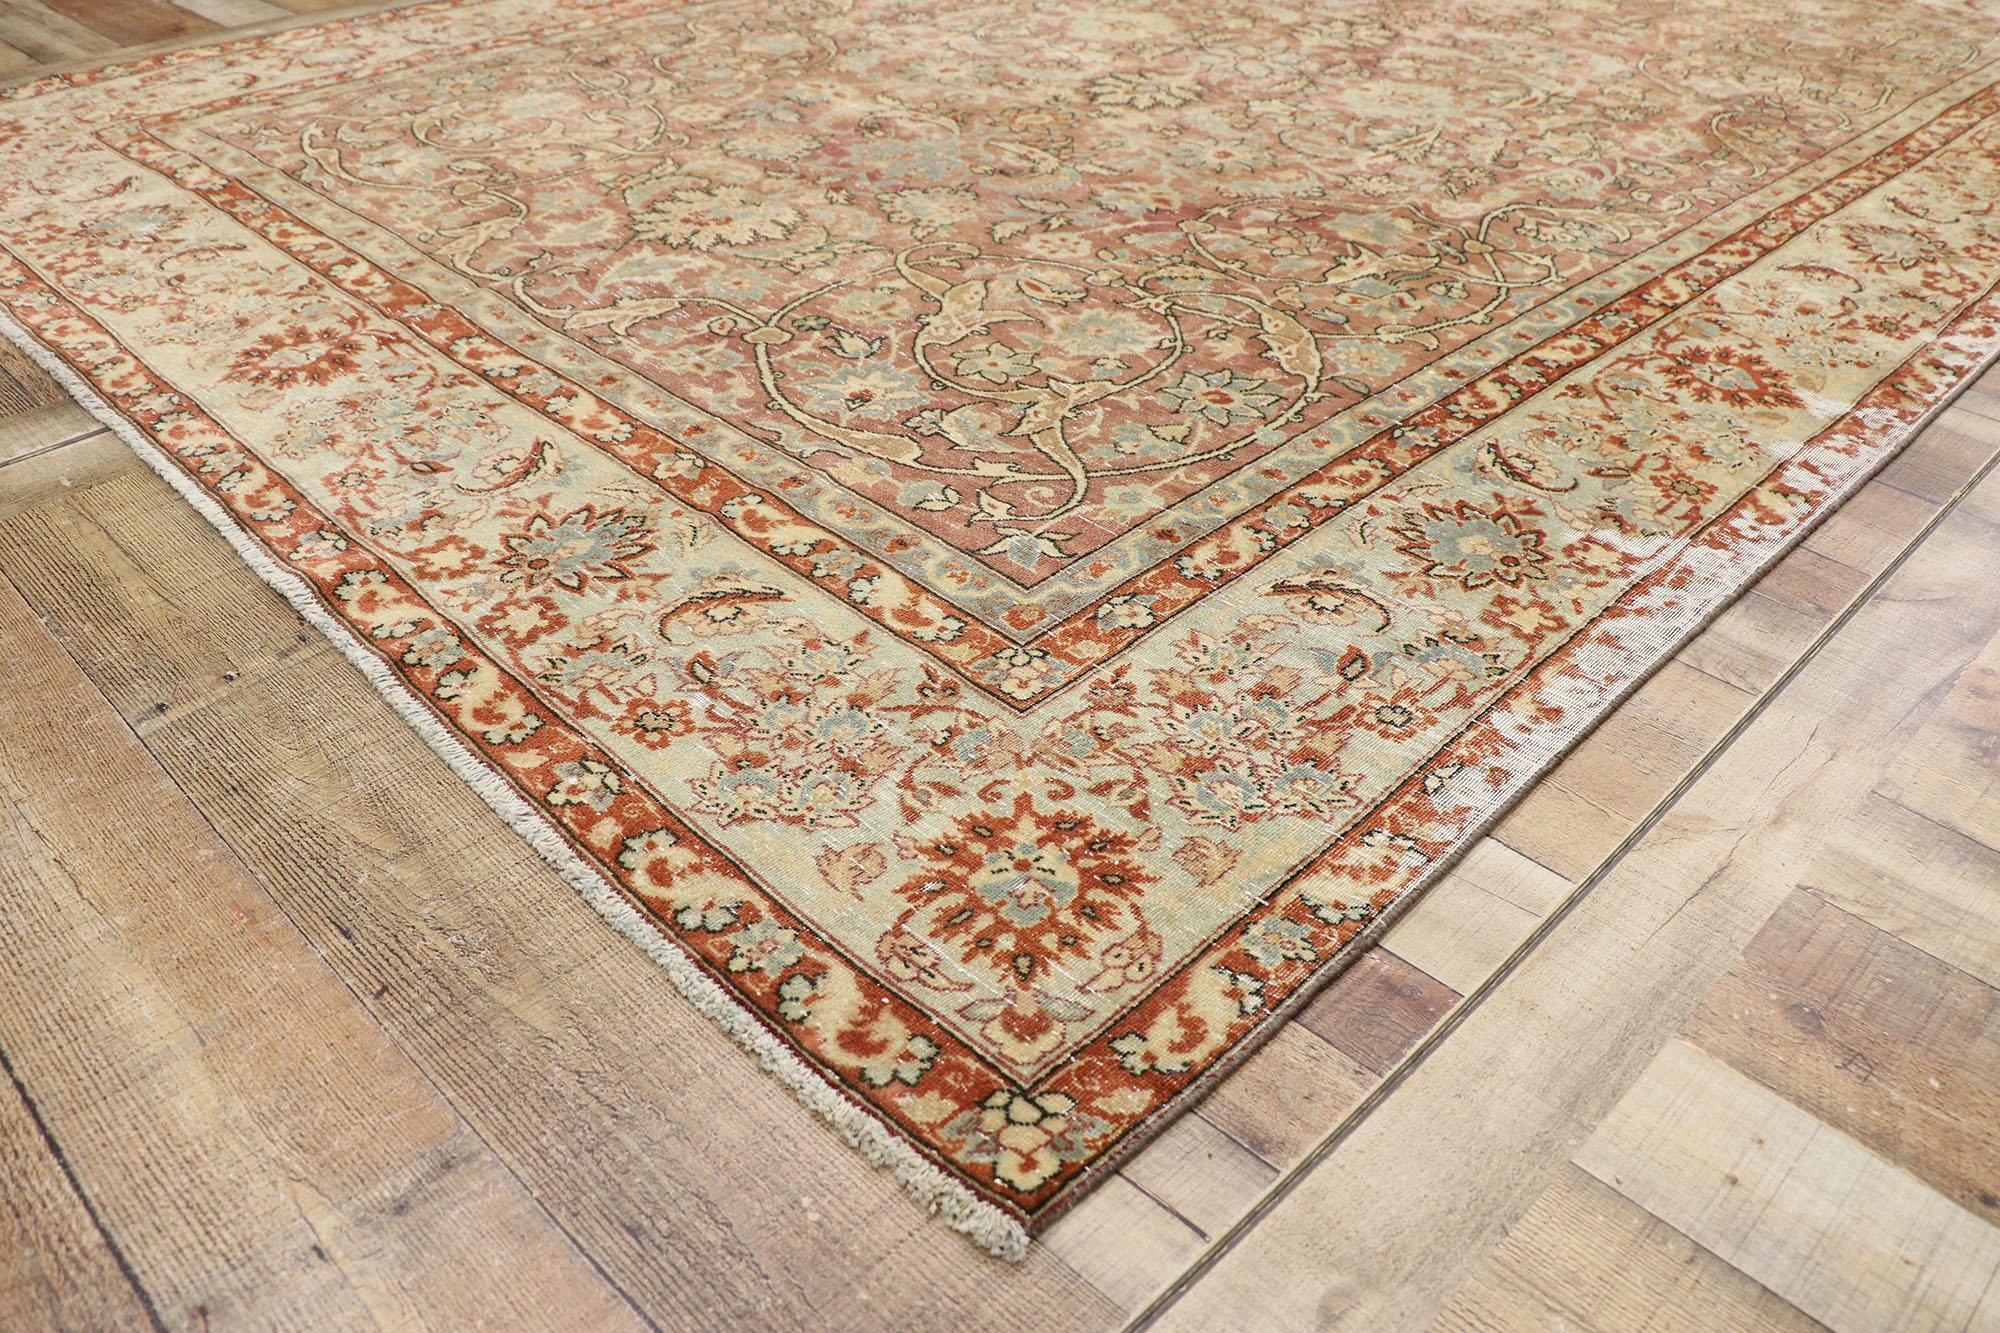 Distressed Antique Persian Tabriz Rug with Rustic Italian Tuscan Style In Distressed Condition For Sale In Dallas, TX